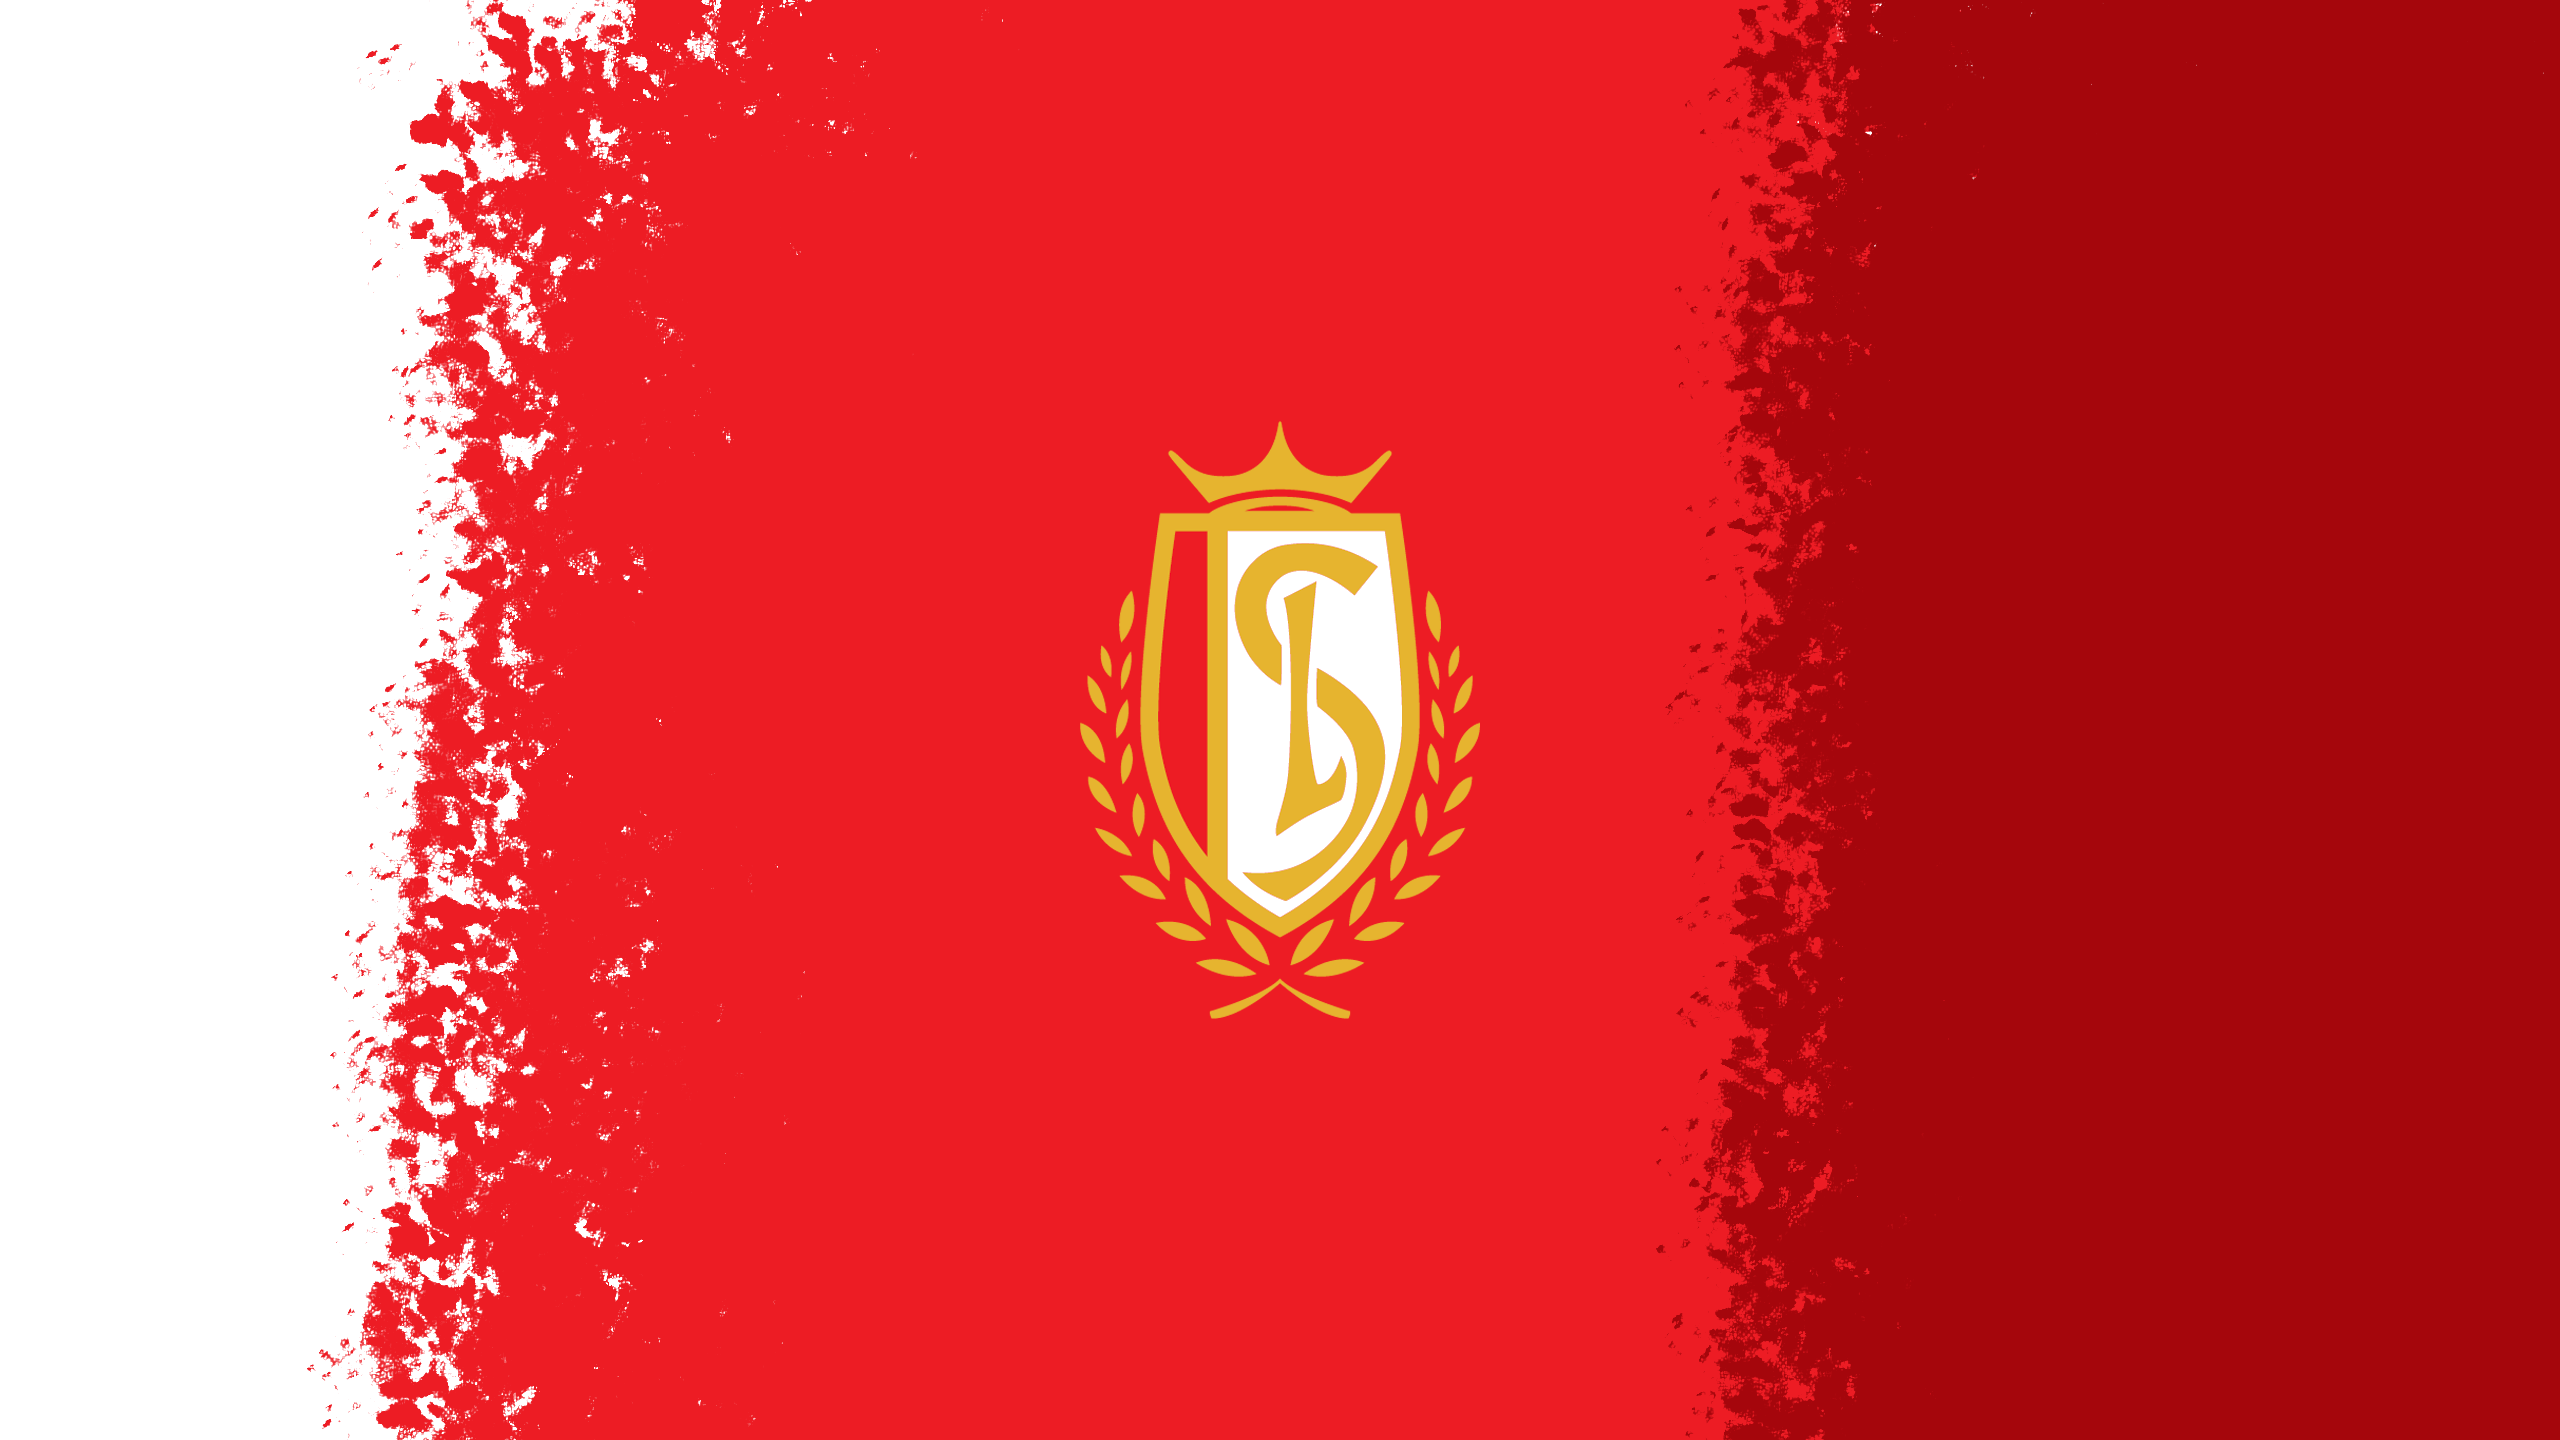 Standard Liège HD Wallpapers and Backgrounds